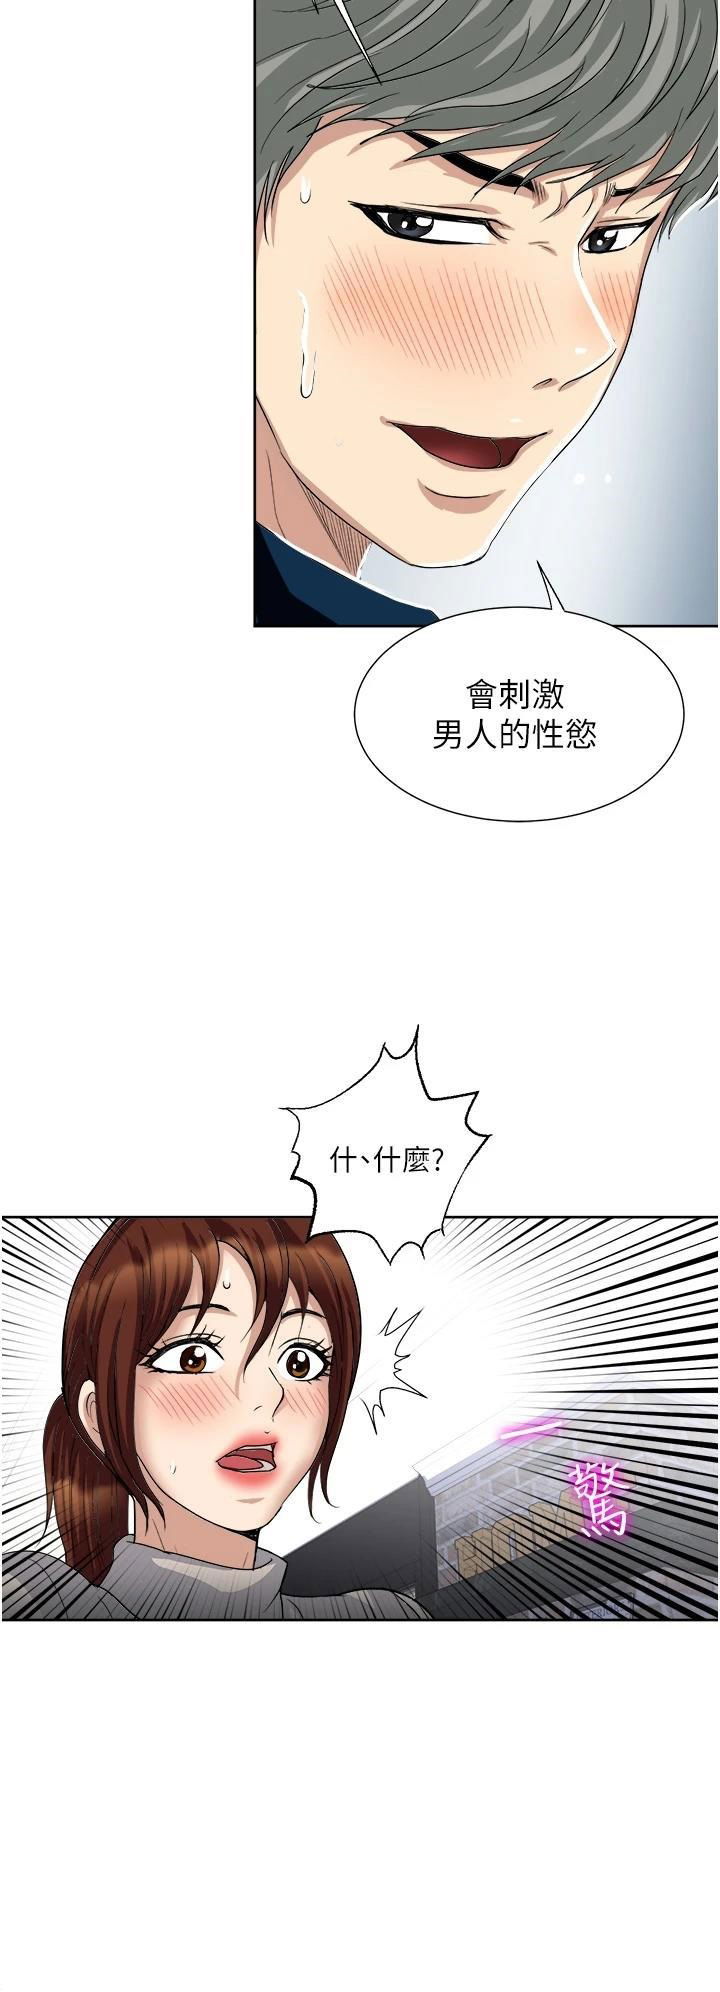 just-once-raw-chap-29-33